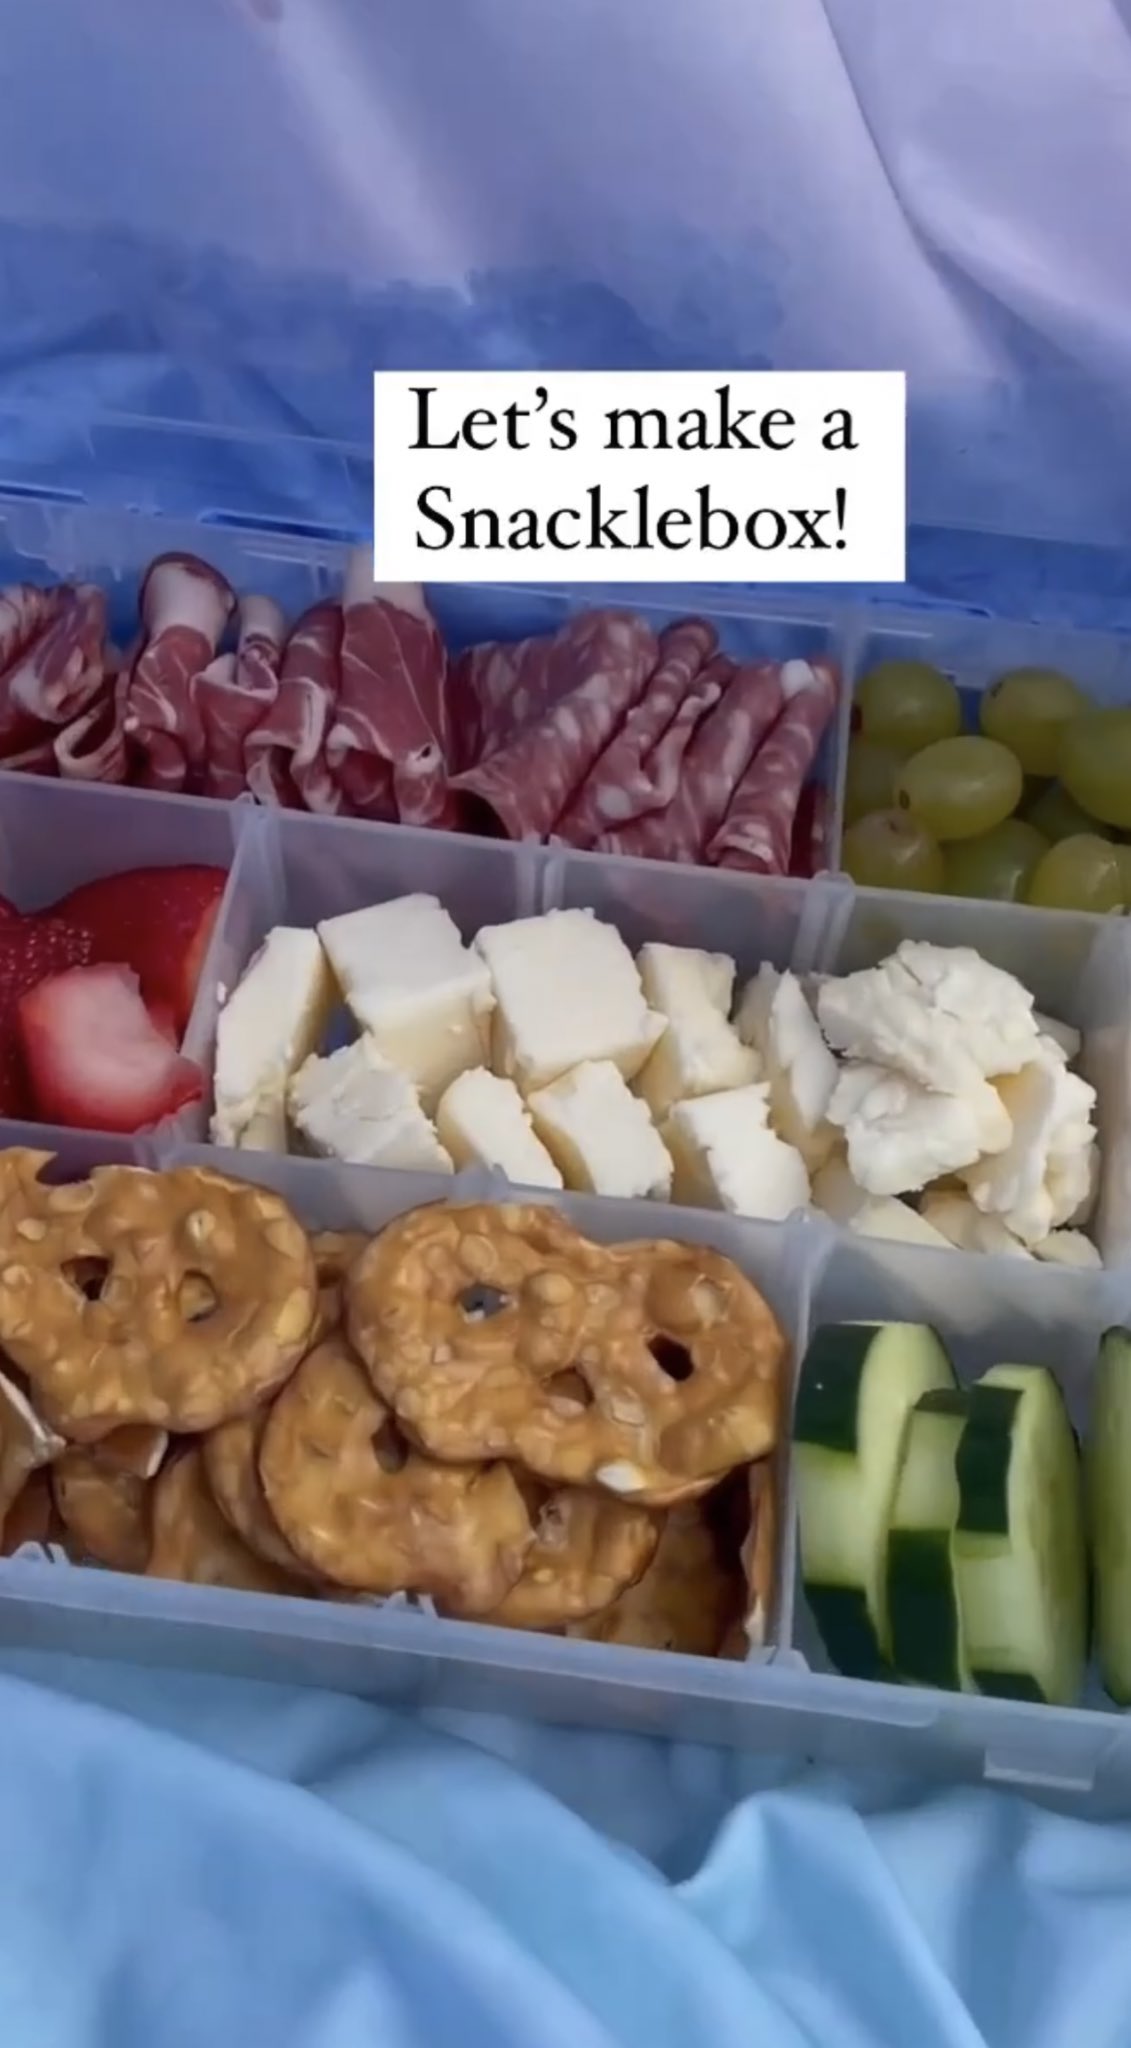 Raven Brunner on X: The snackle box trend makes me want to scream because  these containers aren't made with food grade plastic   / X